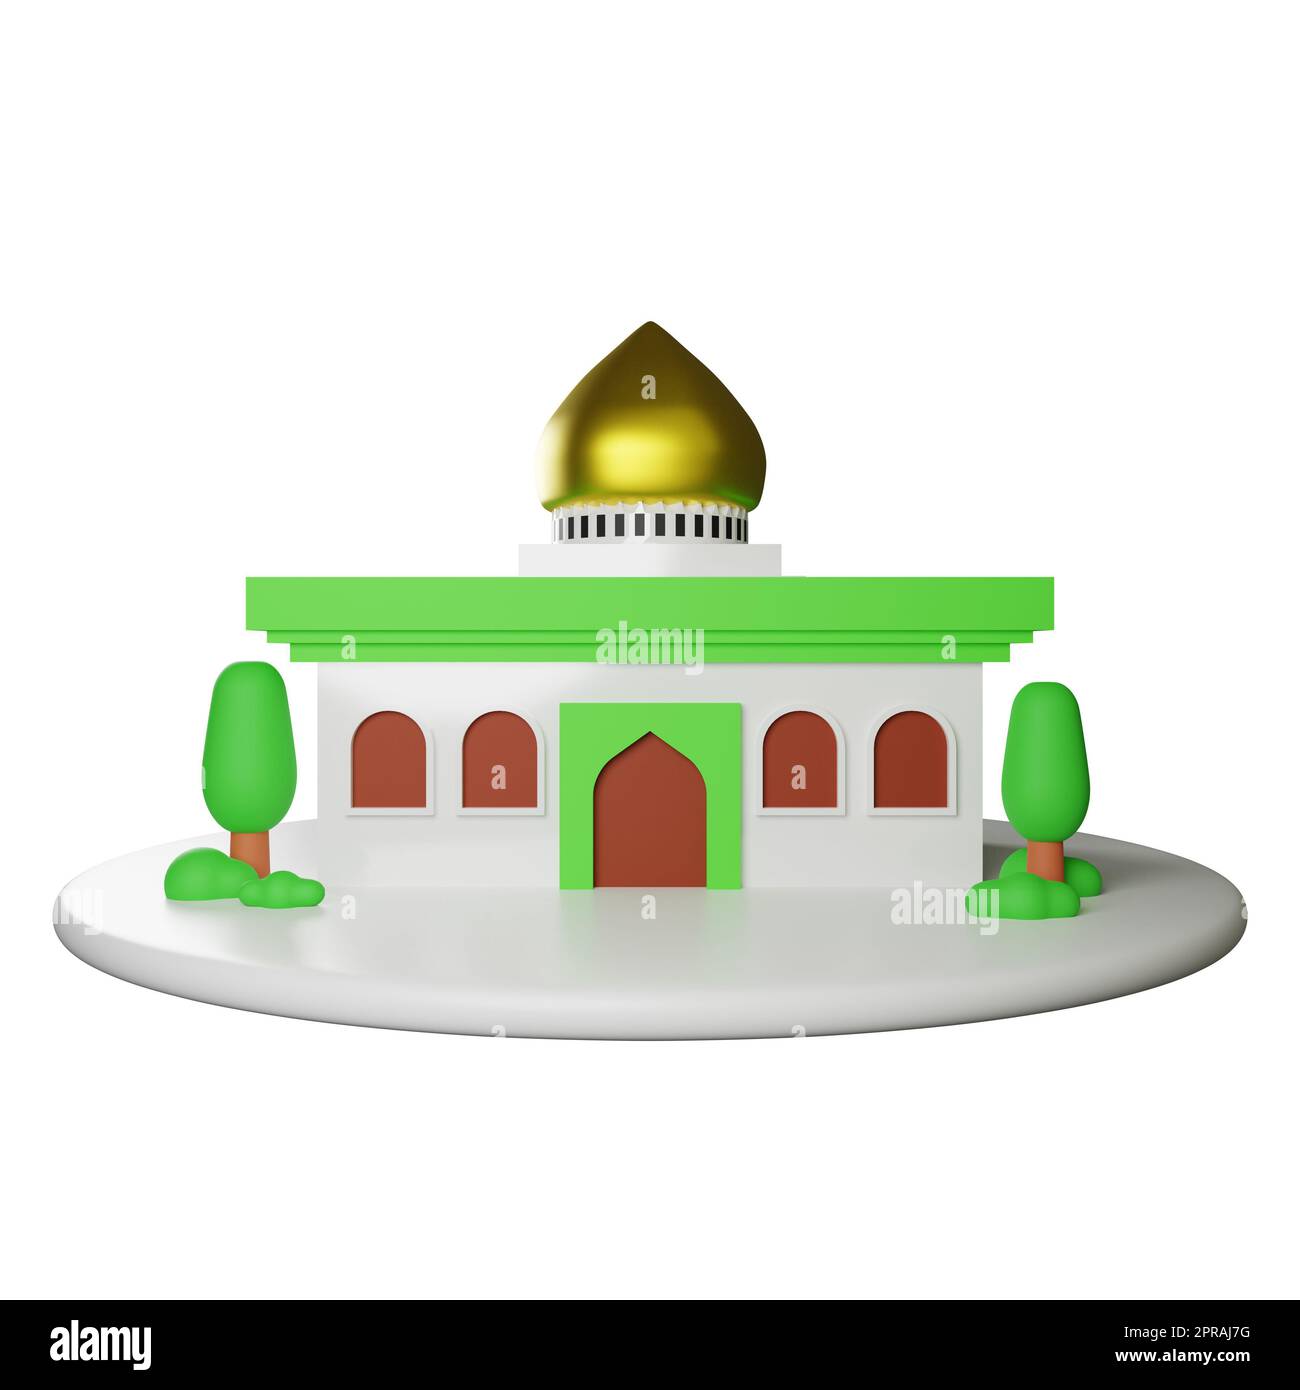 Islamic architectural mosque building Stock Photo